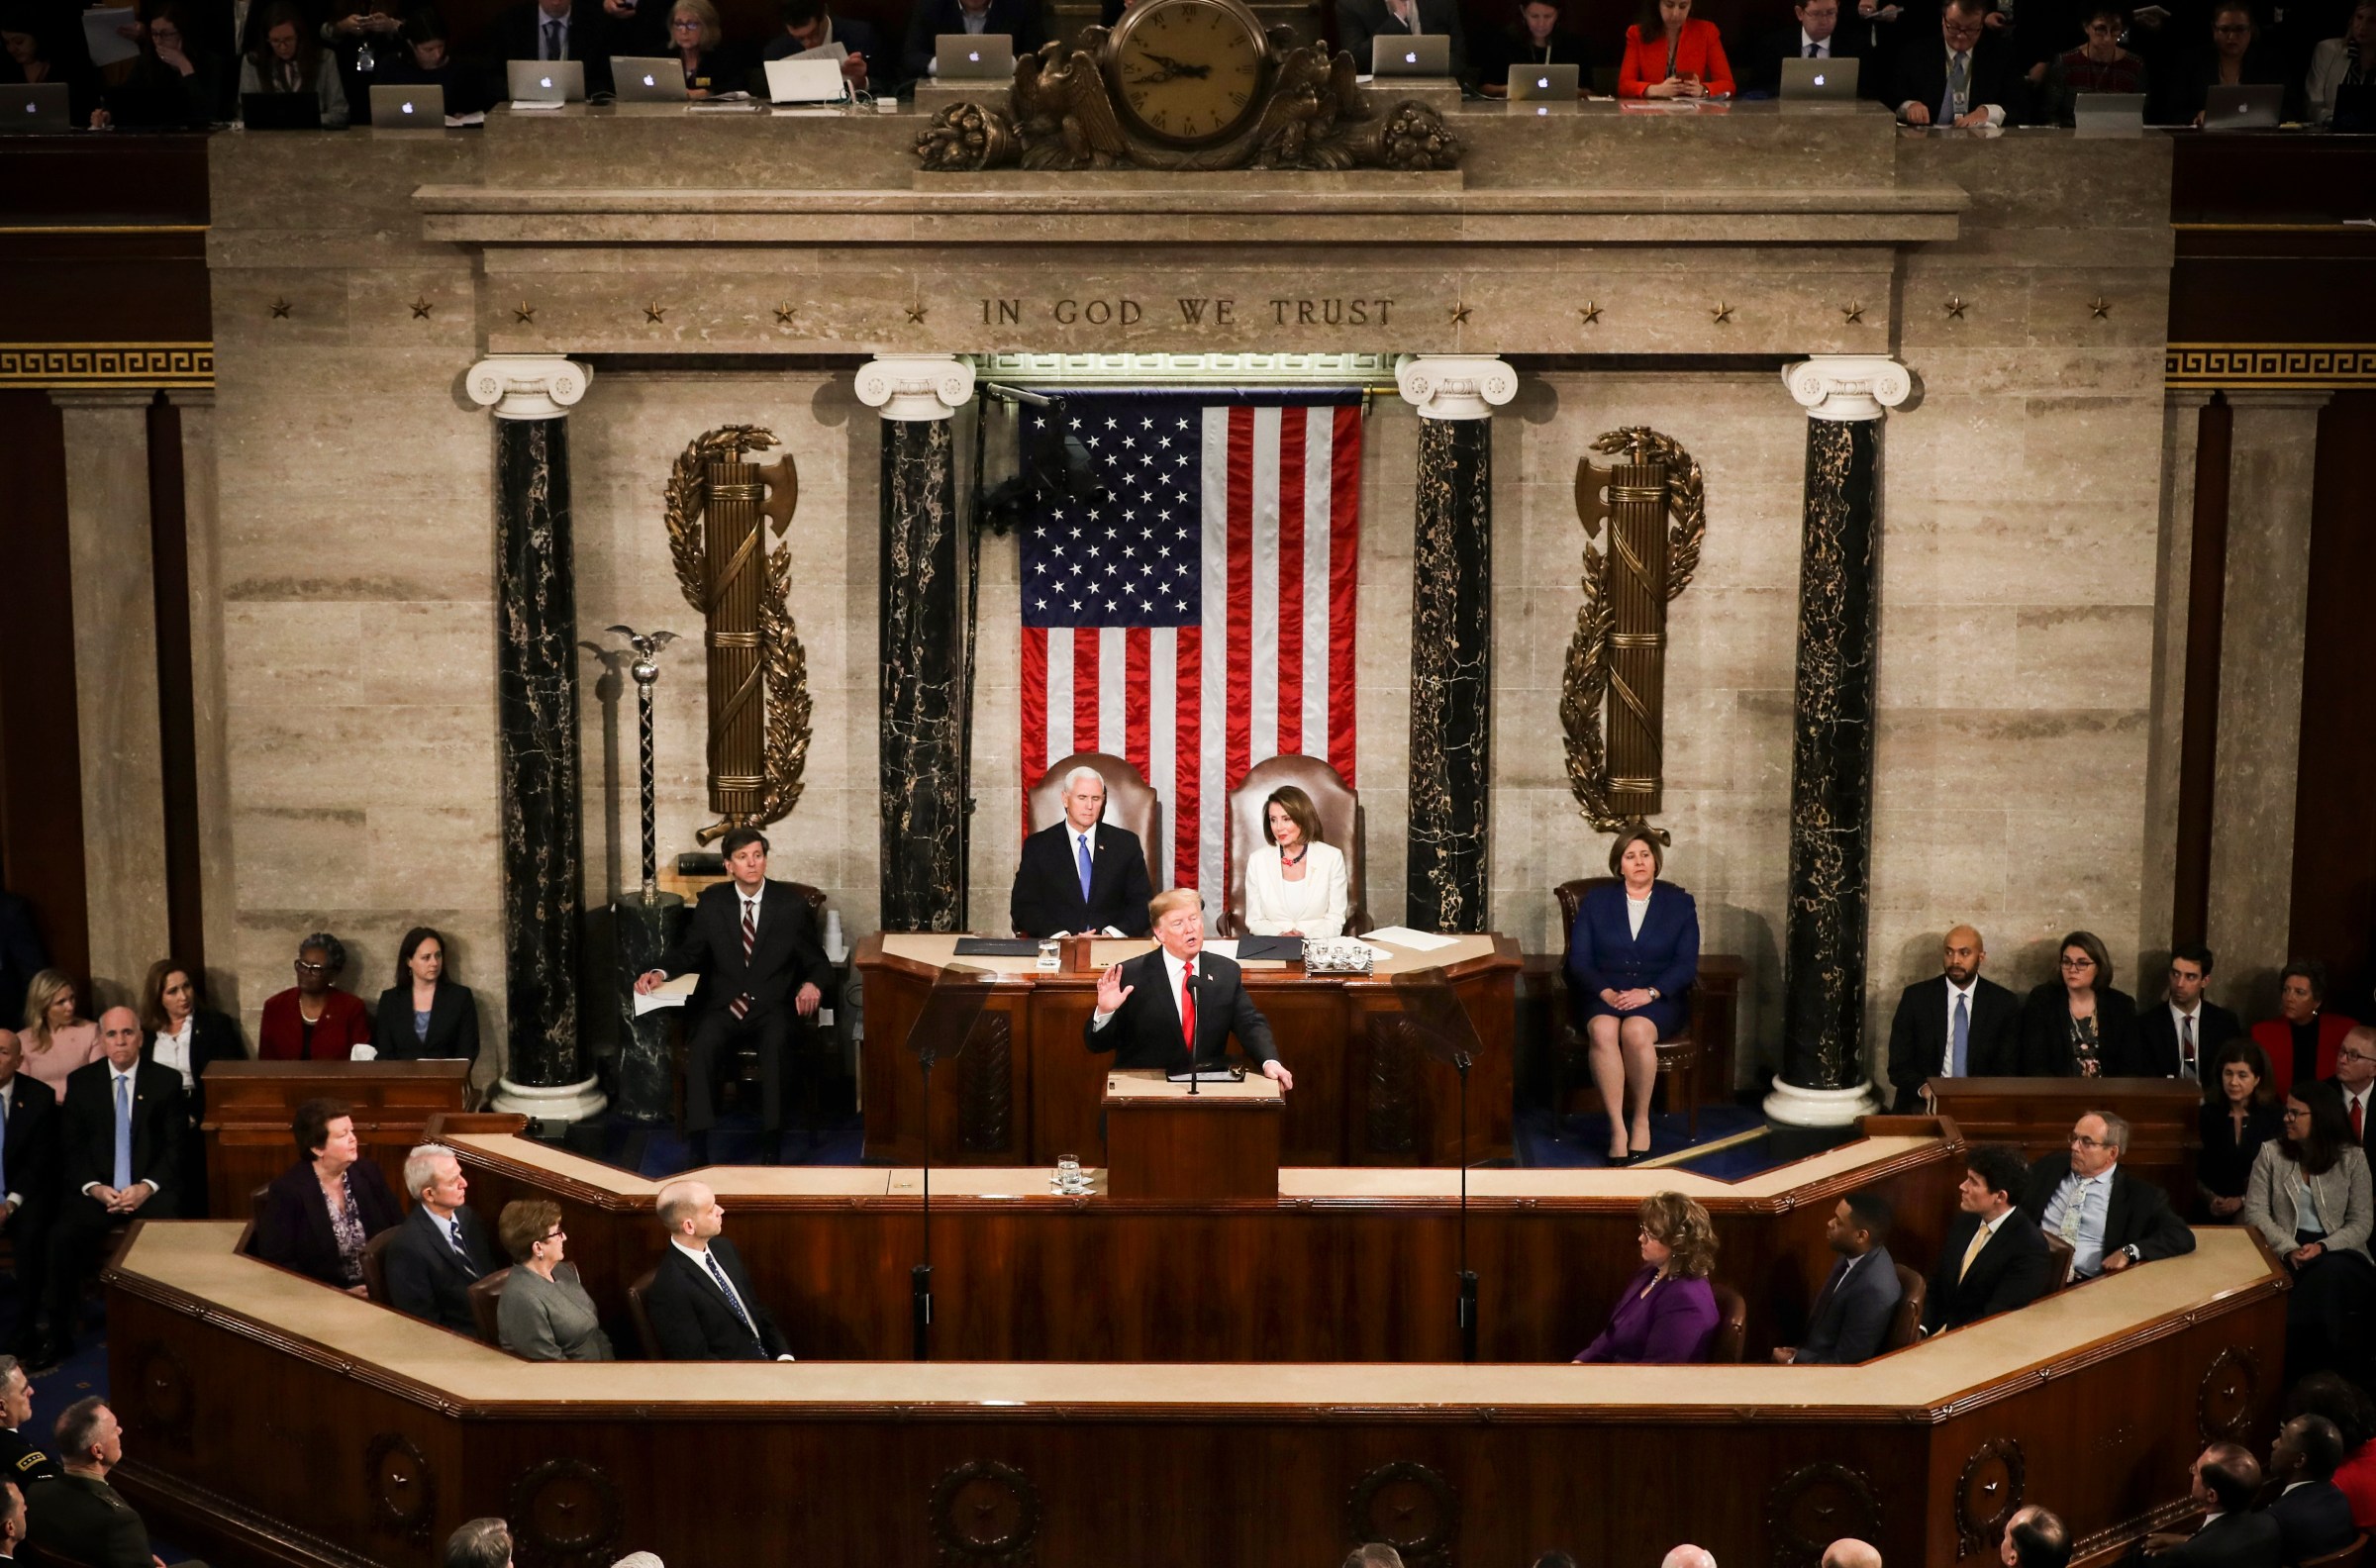 President Trump, with Speaker Nancy Pelosi and Vice President Mike Pence looking on, delivers the State of the Union address.